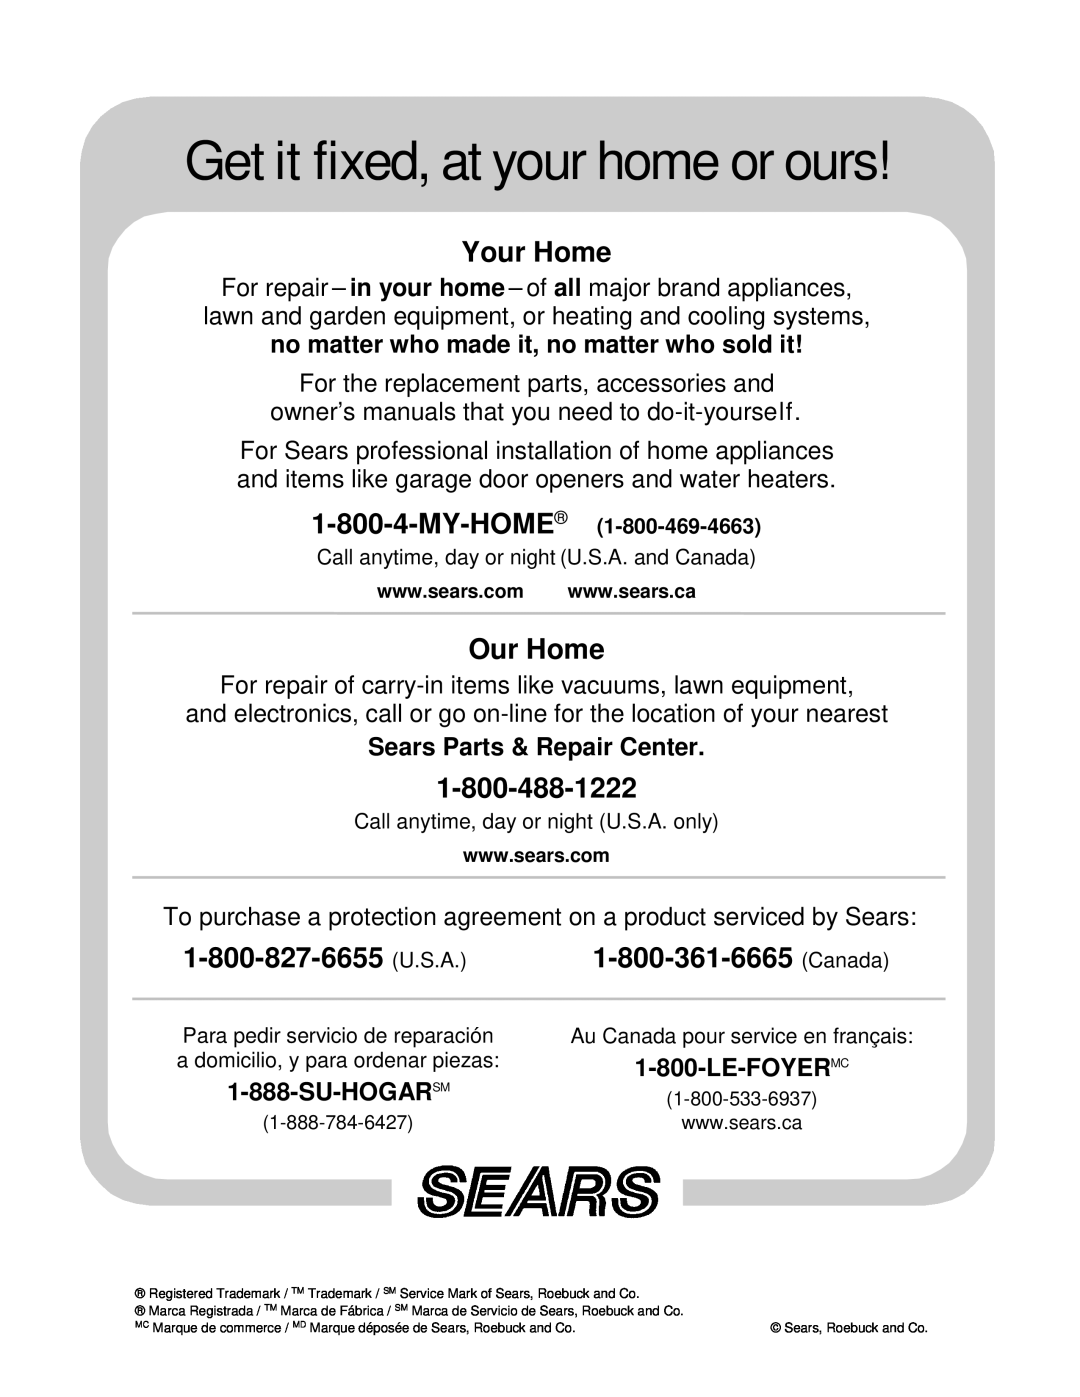 Sears 247.88853 Sears Parts & Repair Center, Su-Hogarsm, Le-Foyermc, Get it fixed, at your home or ours, Your Home 